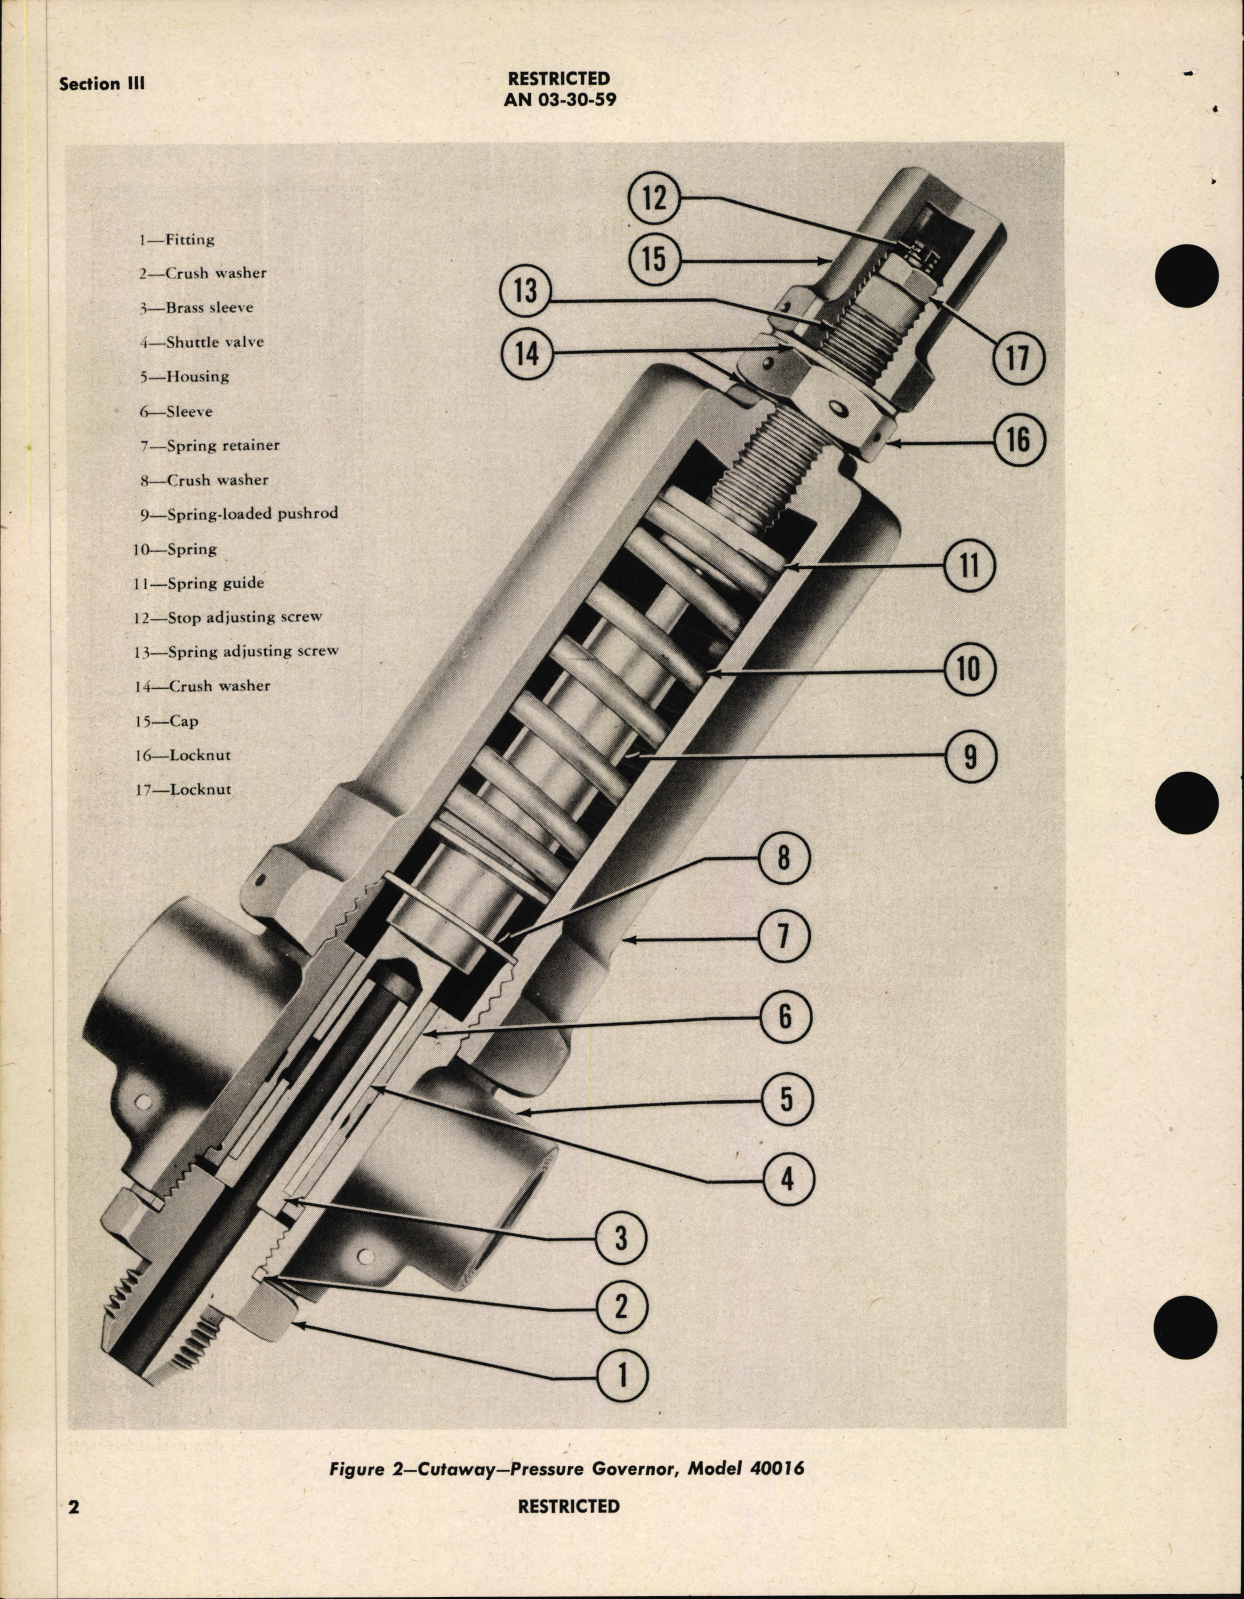 Sample page 6 from AirCorps Library document: Handbook of Instructions with Parts Catalog, Hydraulic System Pressure Governor